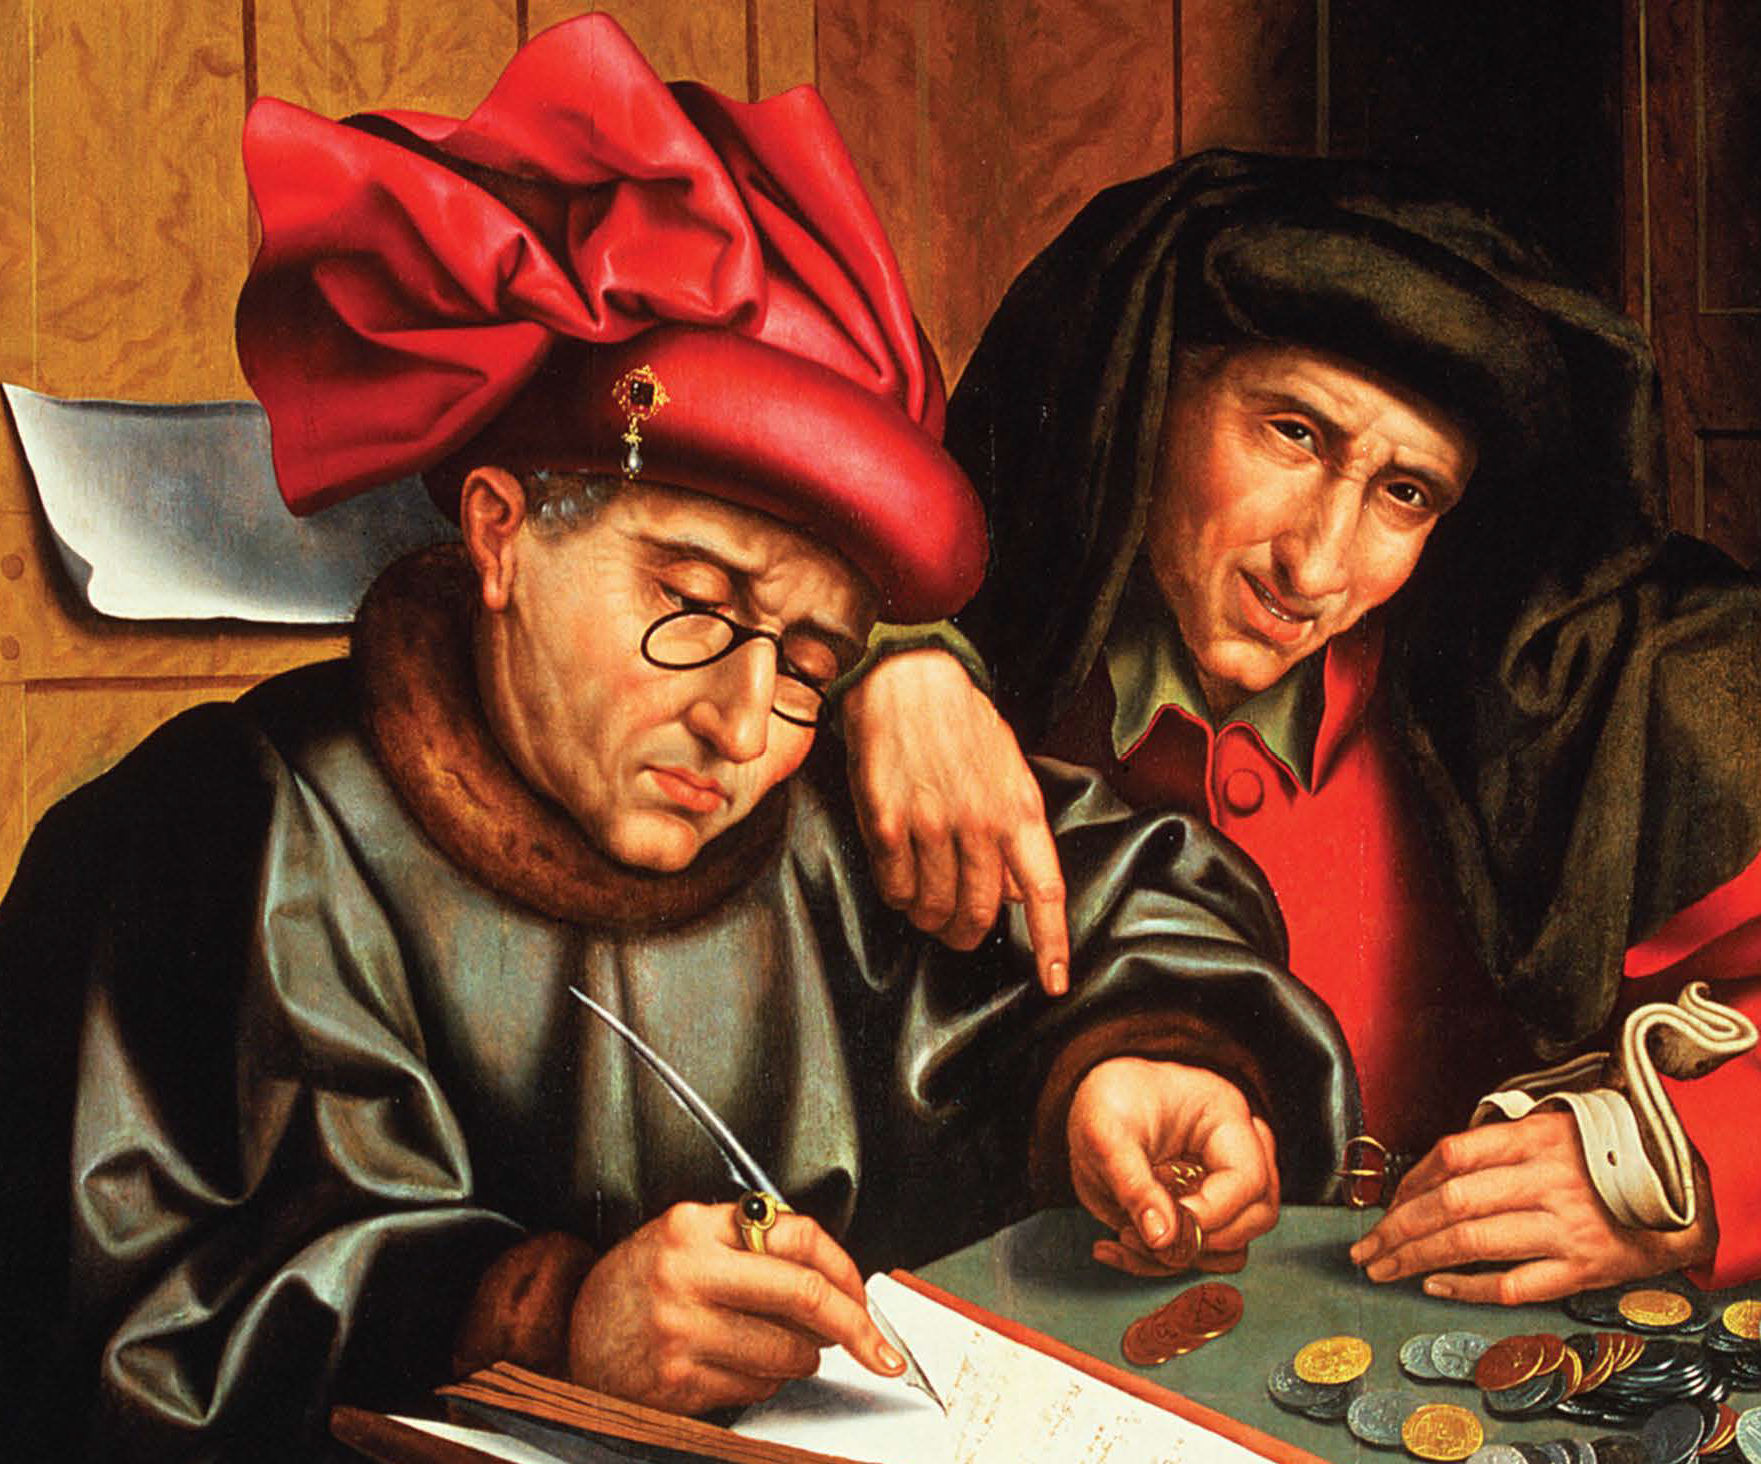 Merchant and scribe in painting show property rights developing first for elites.